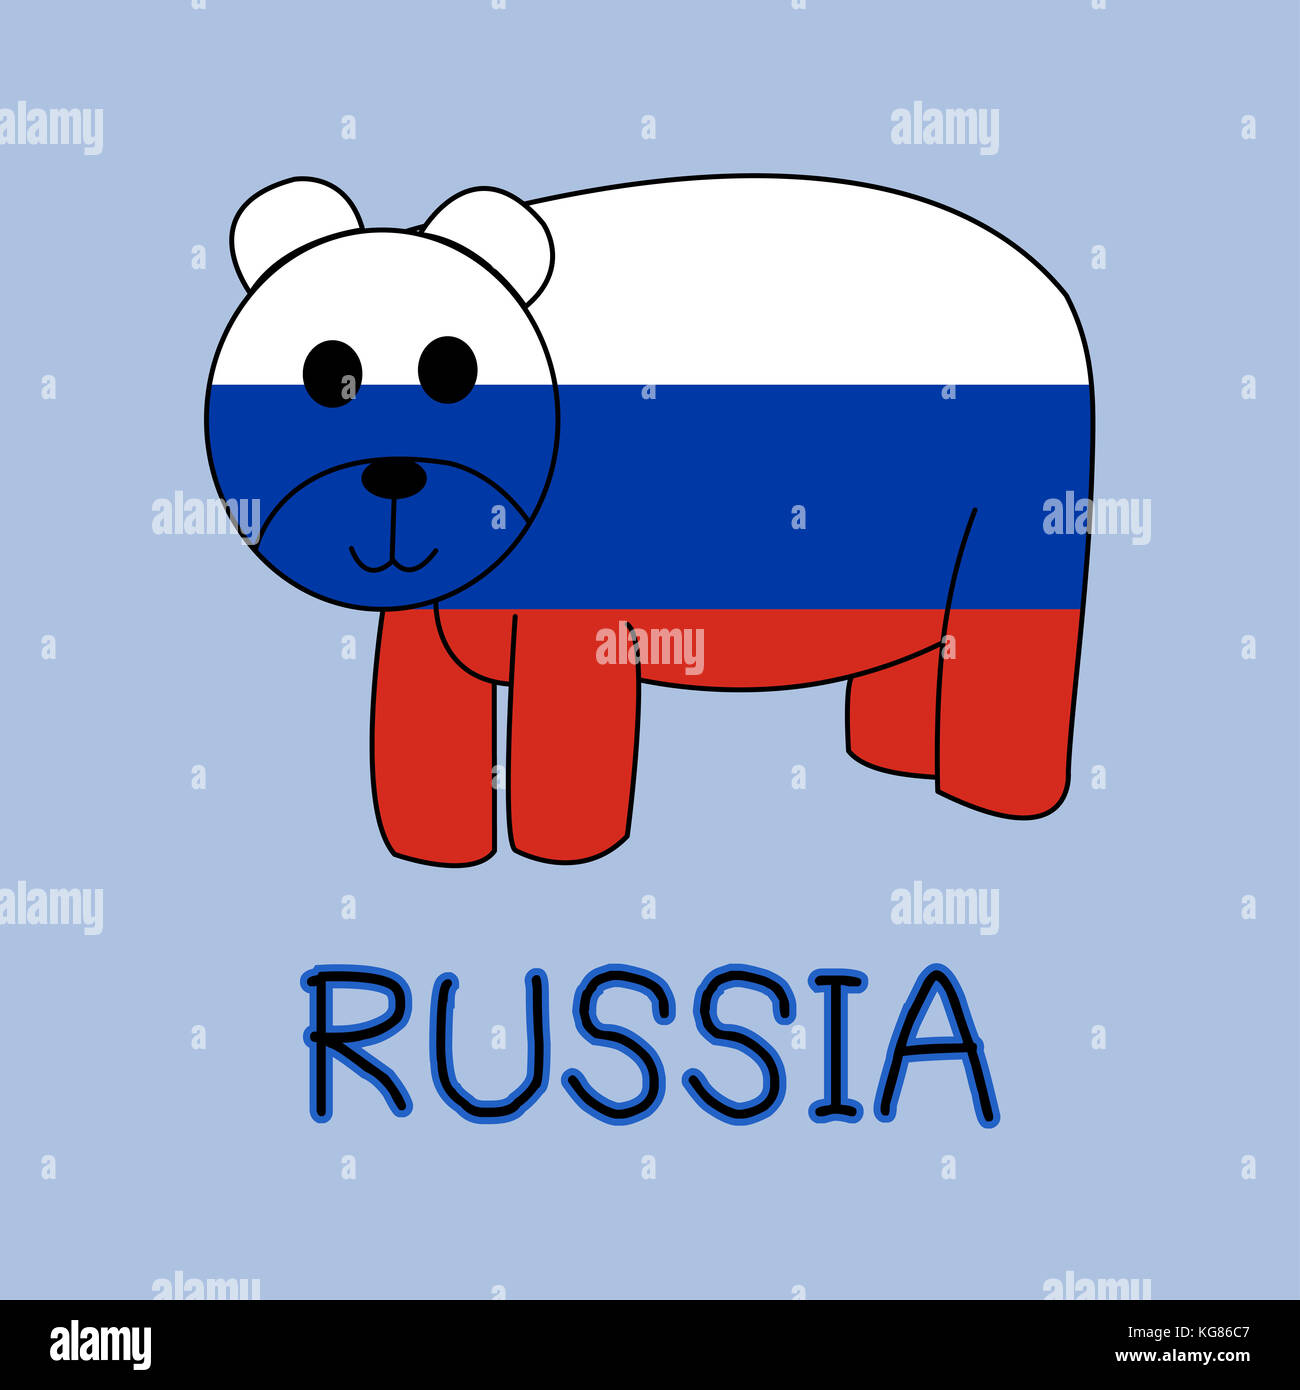 Bear in a Hat: A blog from Stetson's Program in Russian, East European, and  Eurasian Studies: Flag facts!